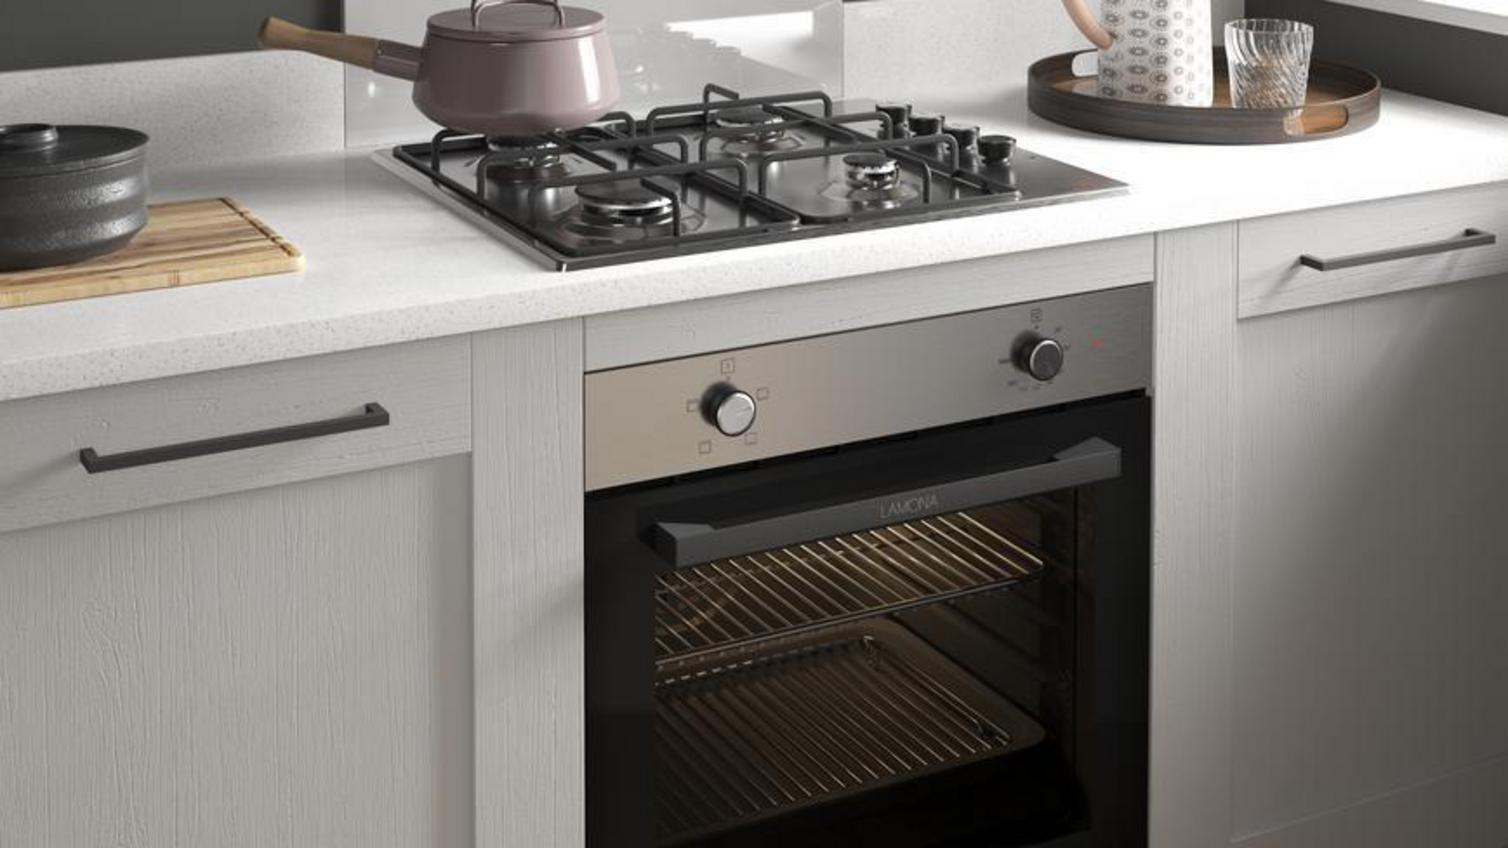 A Lamona oven and hob combination in a grey shaker kitchen